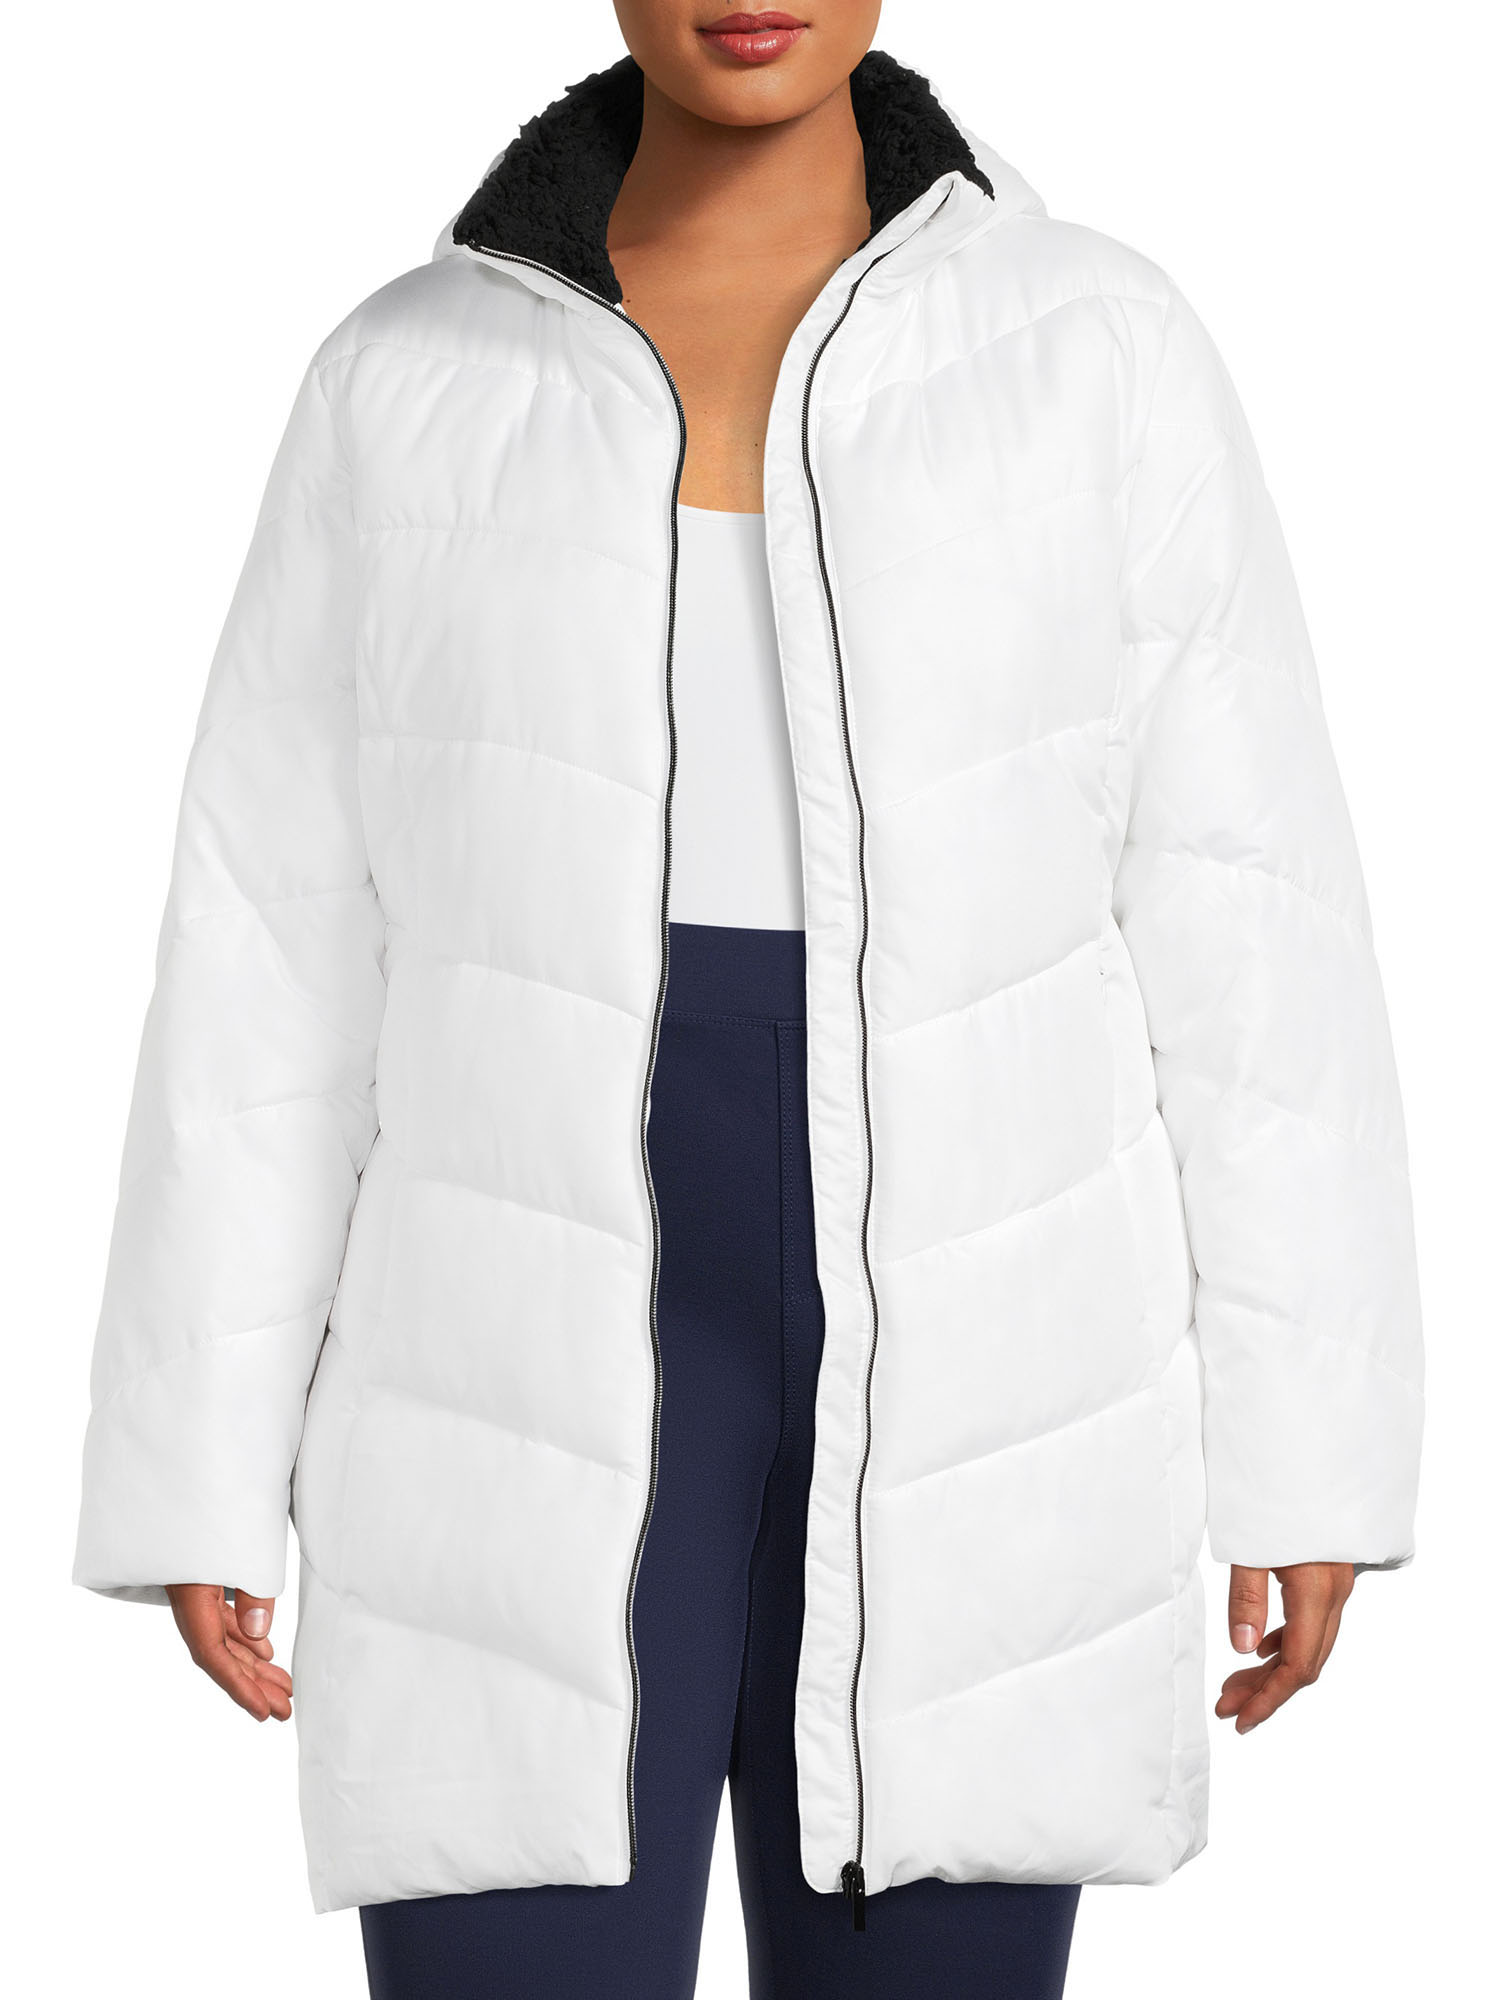 Big Chill Women's Chevron Quilted Puffer Jacket with Hood, Sizes 1X-3X - image 1 of 6